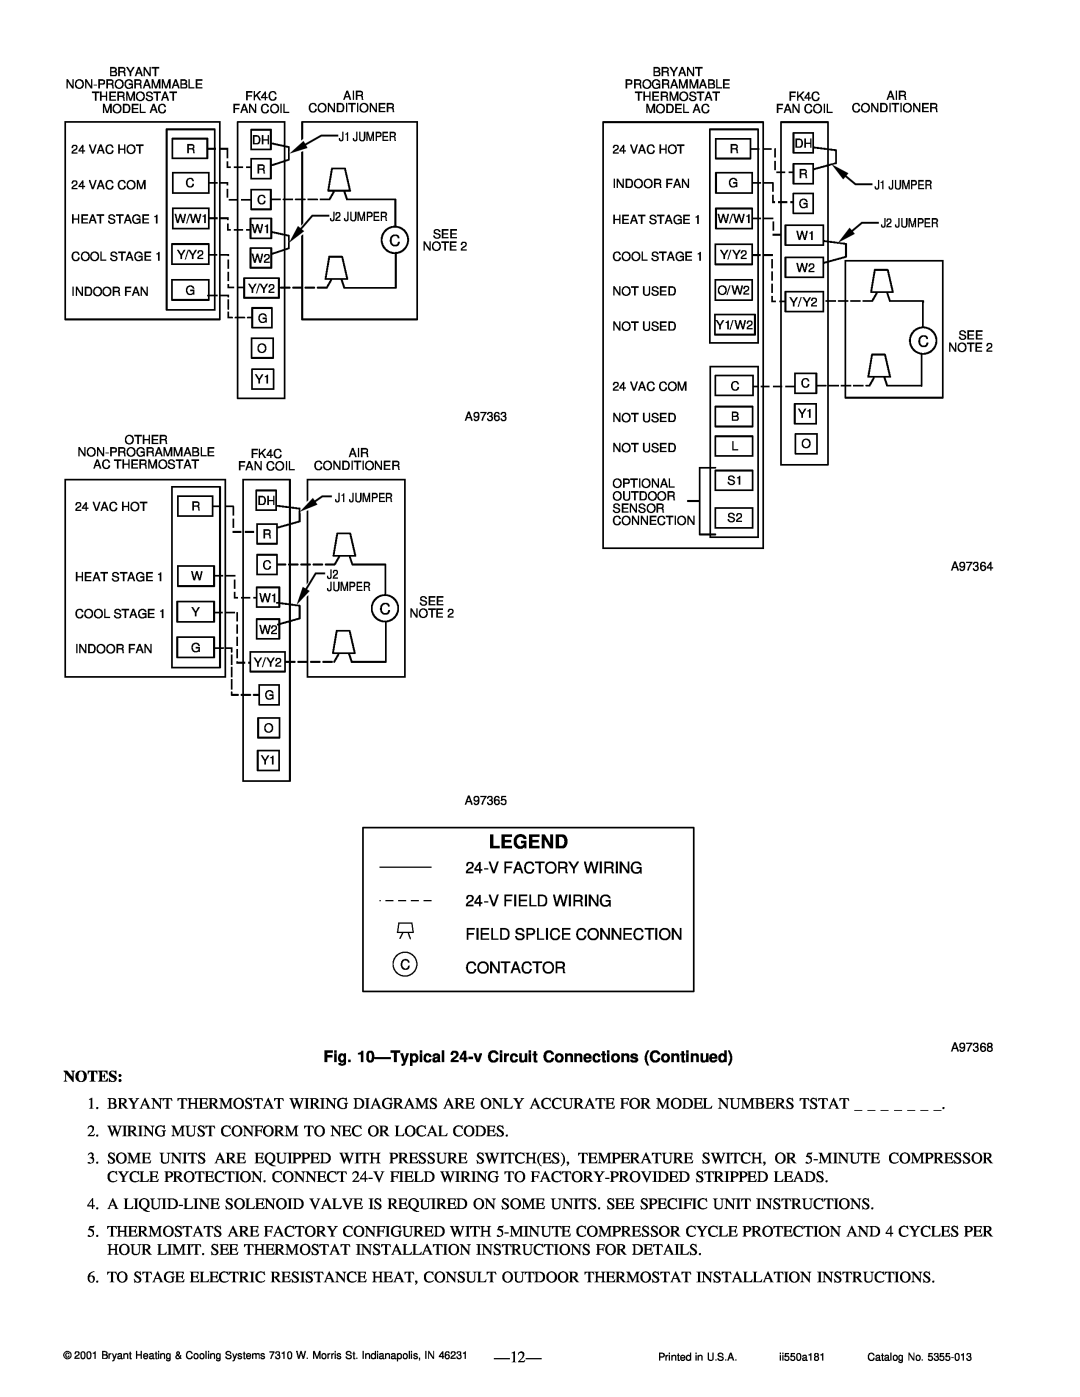 Bryant 556A, 552A, 550A instruction manual Typical 24-vCircuit Connections Continued, Legend 